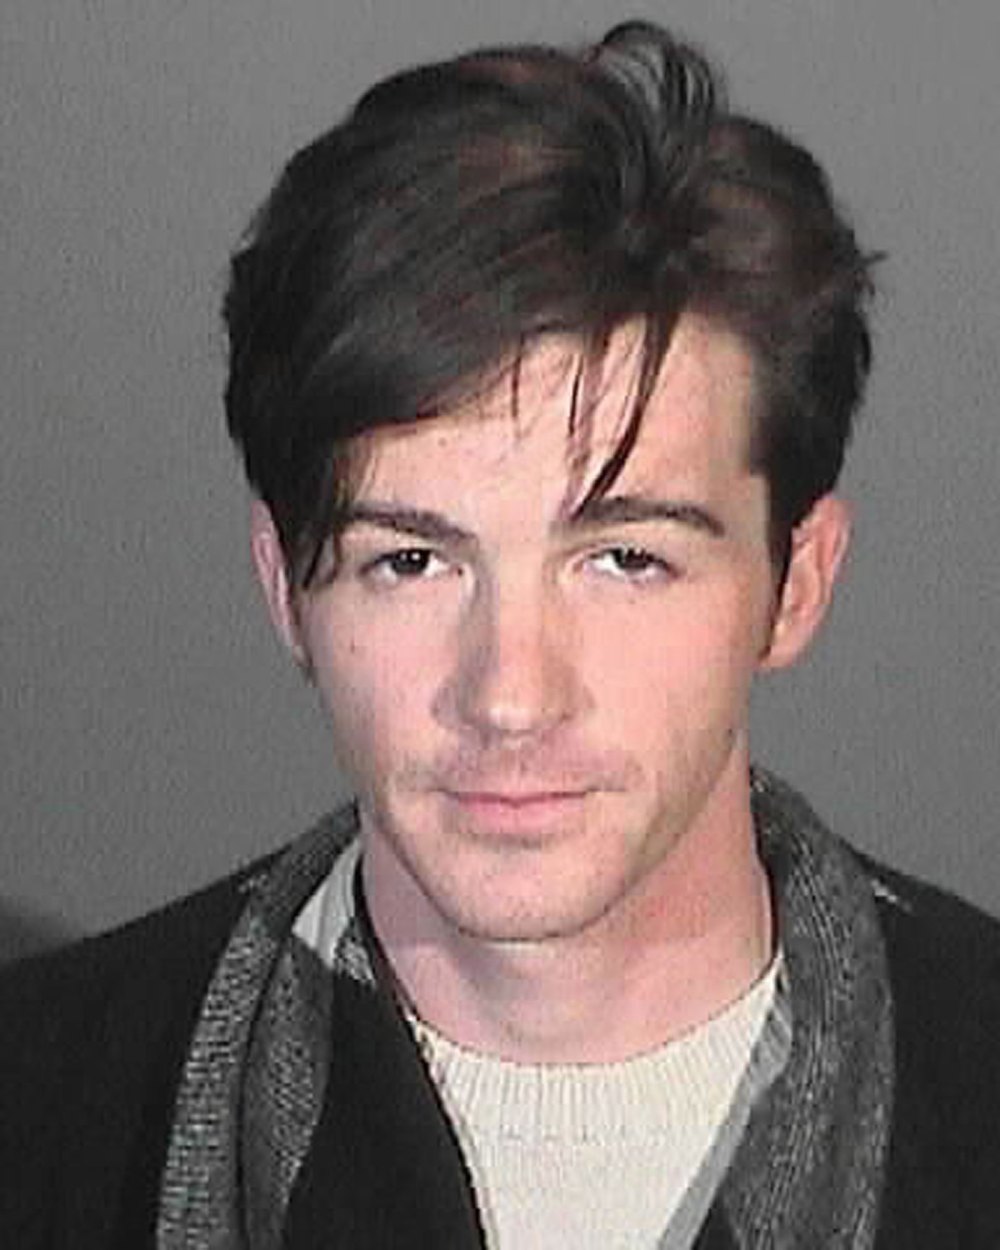 Drake Bell Sentenced to 96 Hours in Jail After DUI Plea: Report